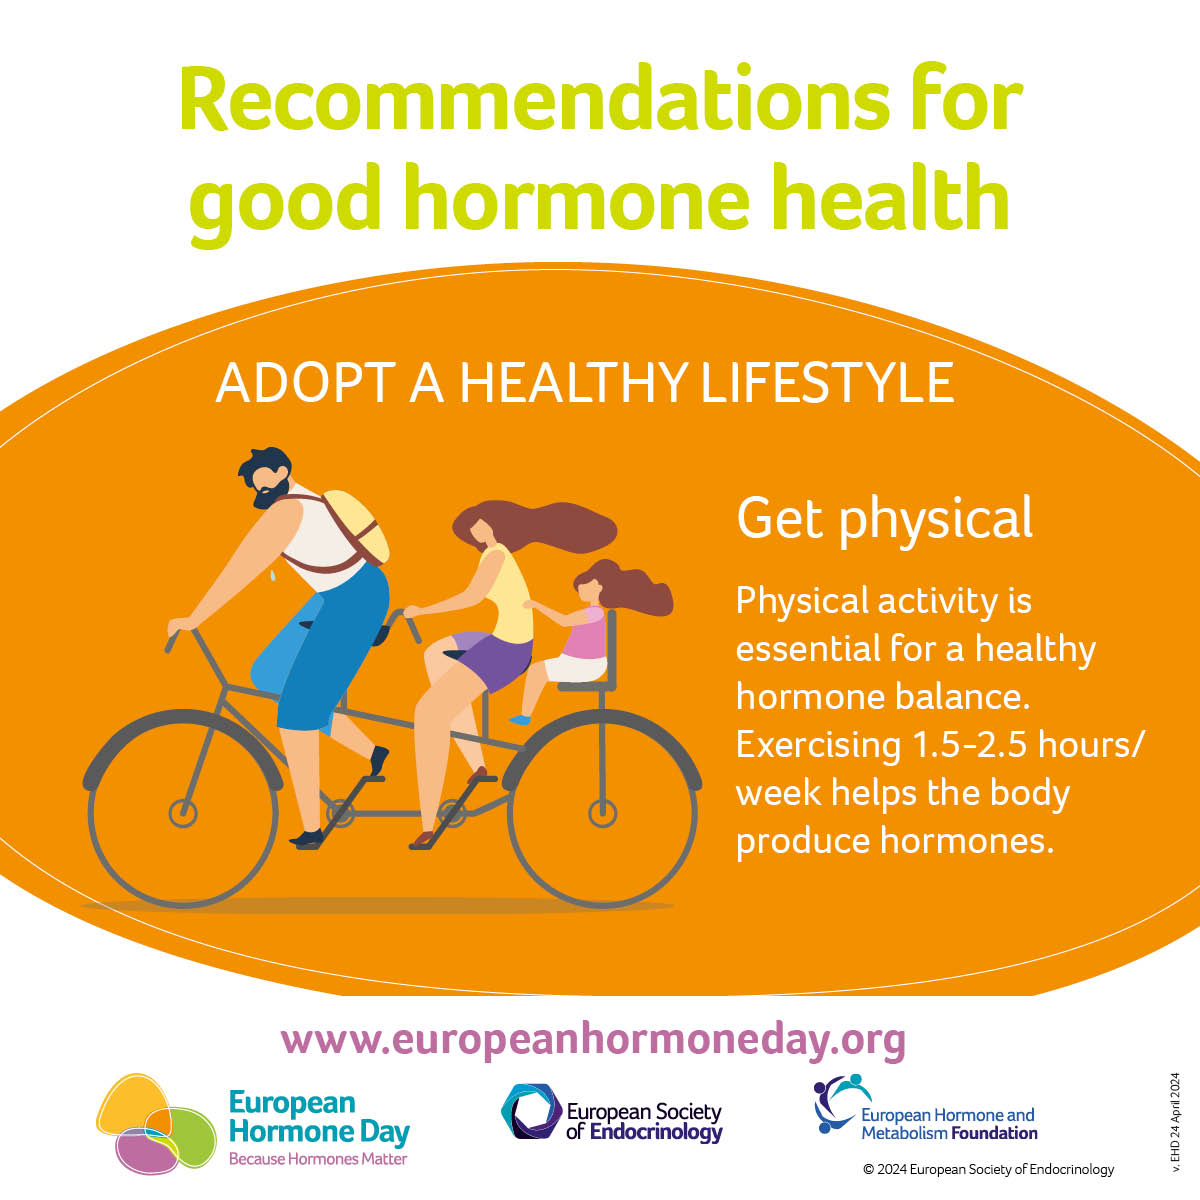 One of the 10 recommendations for good hormone health that we're exploring today is exercise. Read this article from The #Endocrinologist to learn more about endocrine physiology during exercise: ow.ly/Wf3t50Rmap4 #EuropeanHormoneDay #BecasueHormonesMatter @Your_Hormones